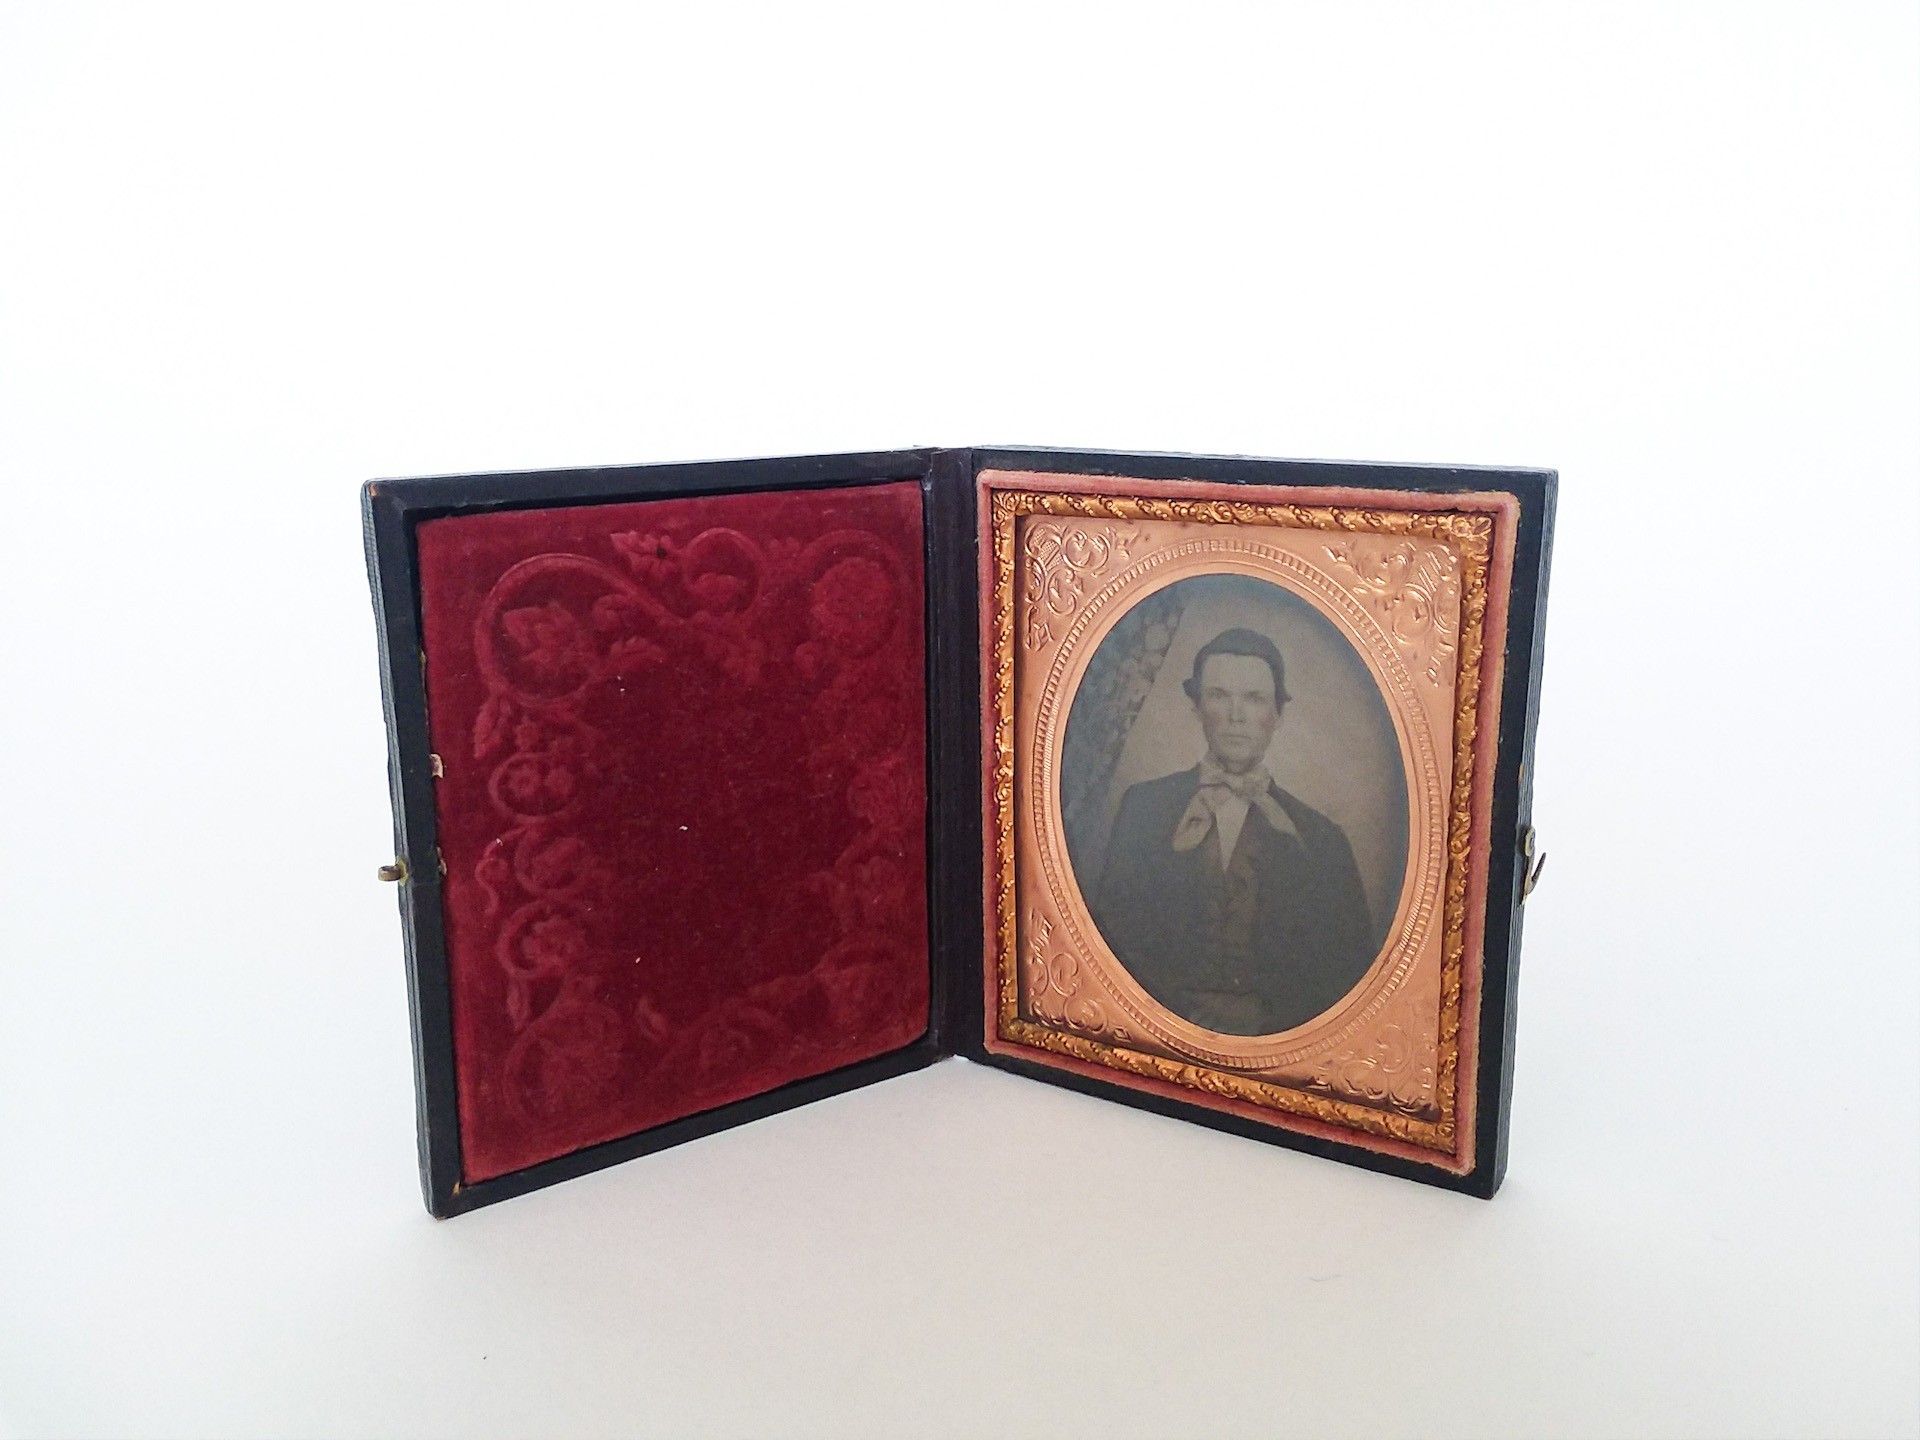 Ambrotype of a man with an oval copper frame in a small case.